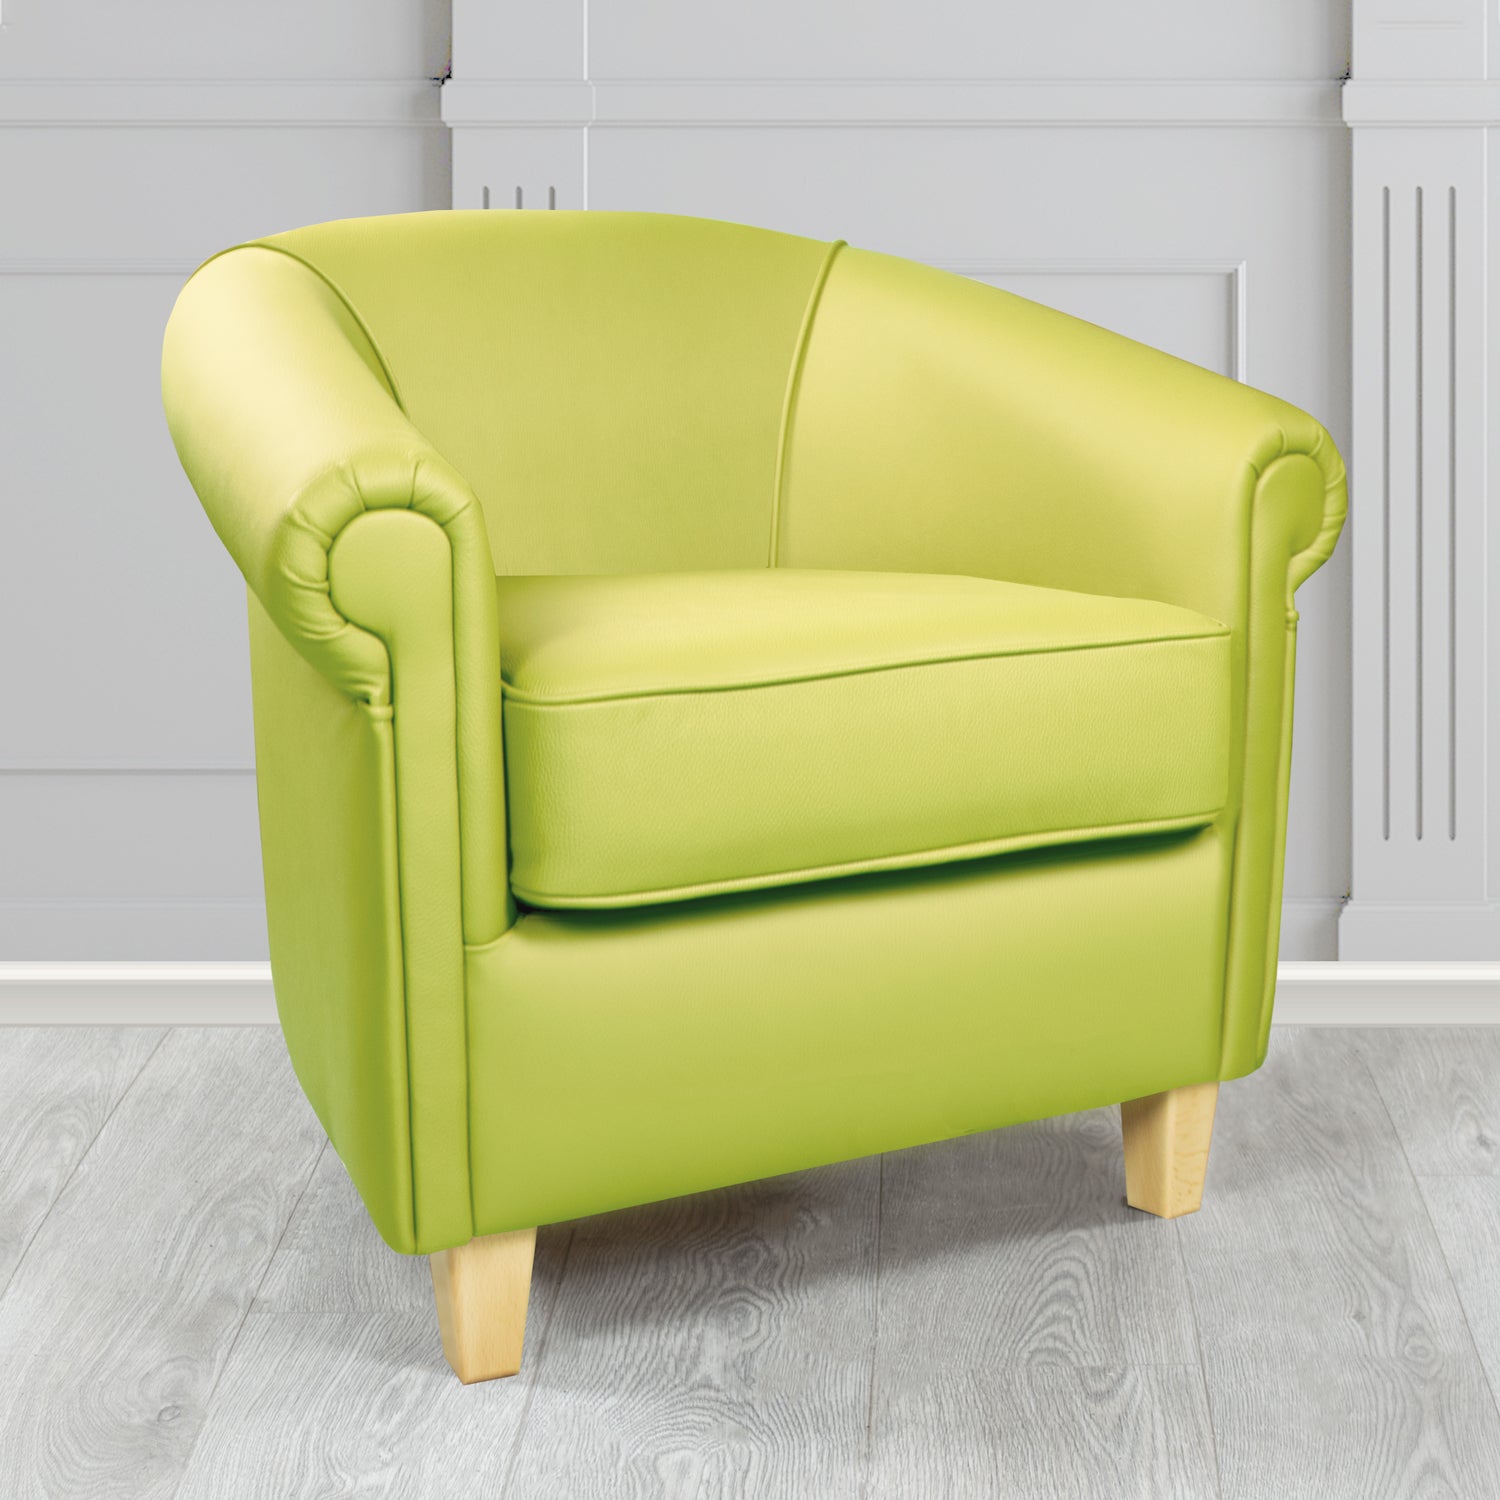 Siena Tub Chair in Crib 5 Shelly Chartreuse Genuine Leather - The Tub Chair Shop